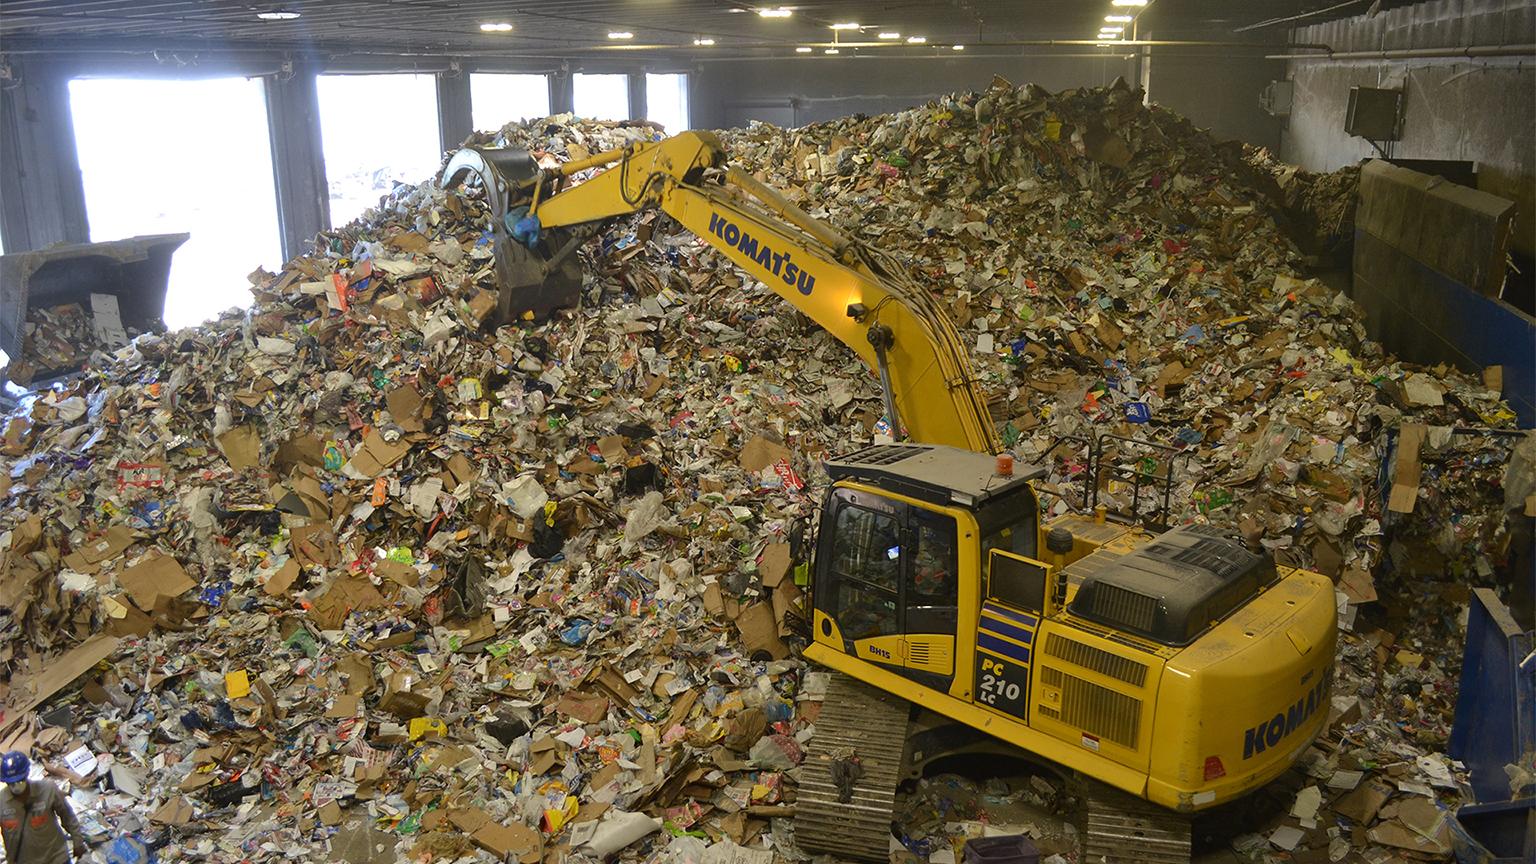 About 400 tons of recycling are processed every day at Lakeshore's facility in Forest View. (Alex Ruppenthal / Chicago Tonight)